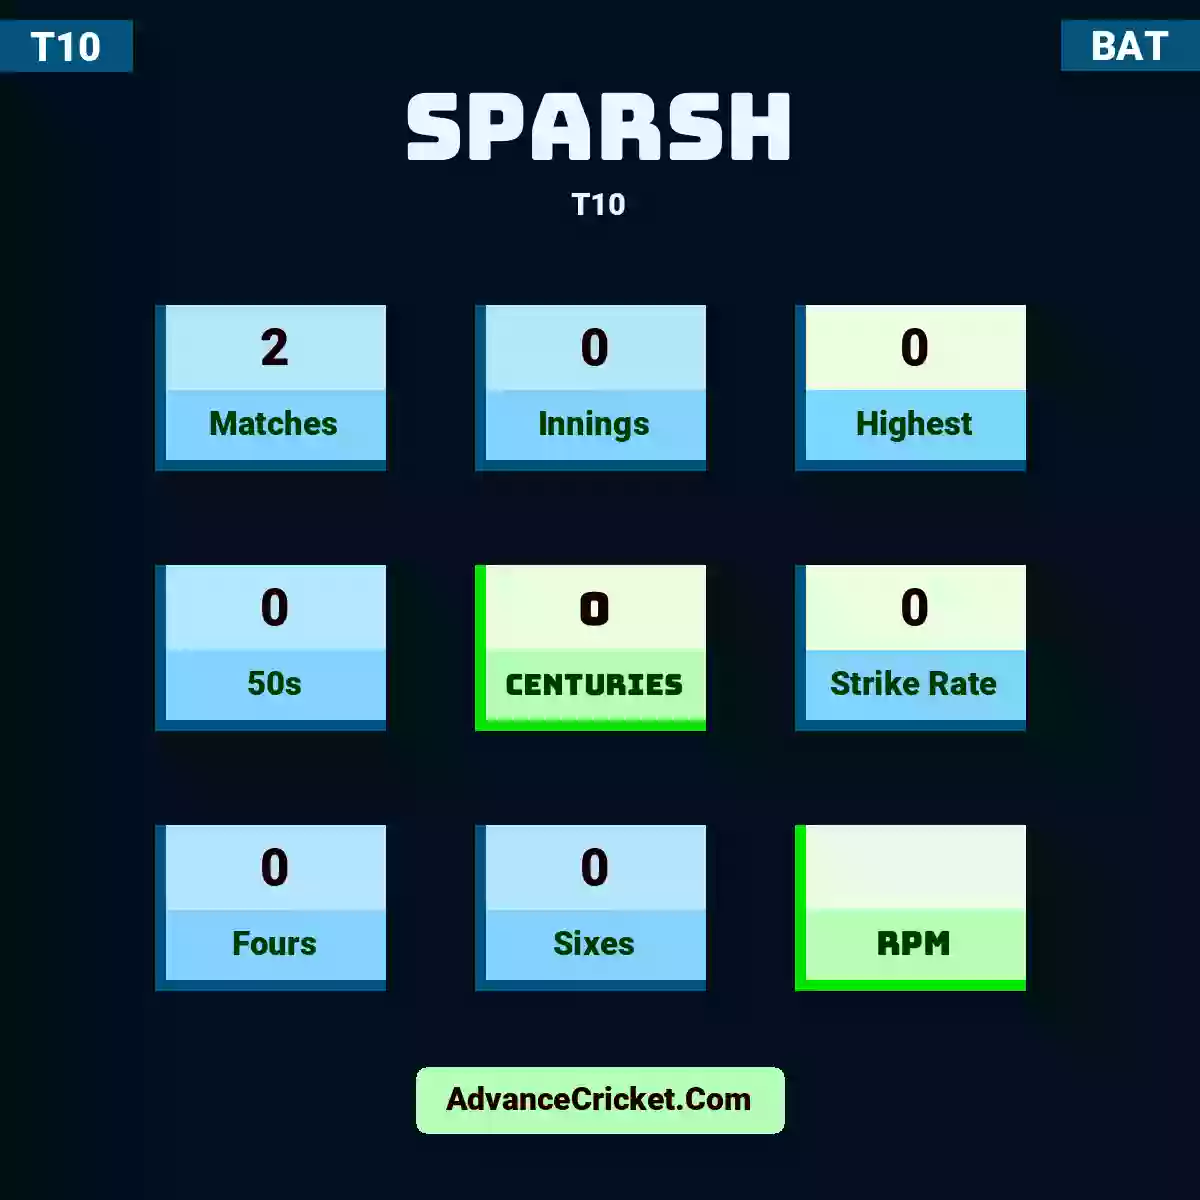 Sparsh T10 , Sparsh played 2 matches, scored 0 runs as highest, 0 half-centuries, and 0 centuries, with a strike rate of 0. Sparsh hit 0 fours and 0 sixes.